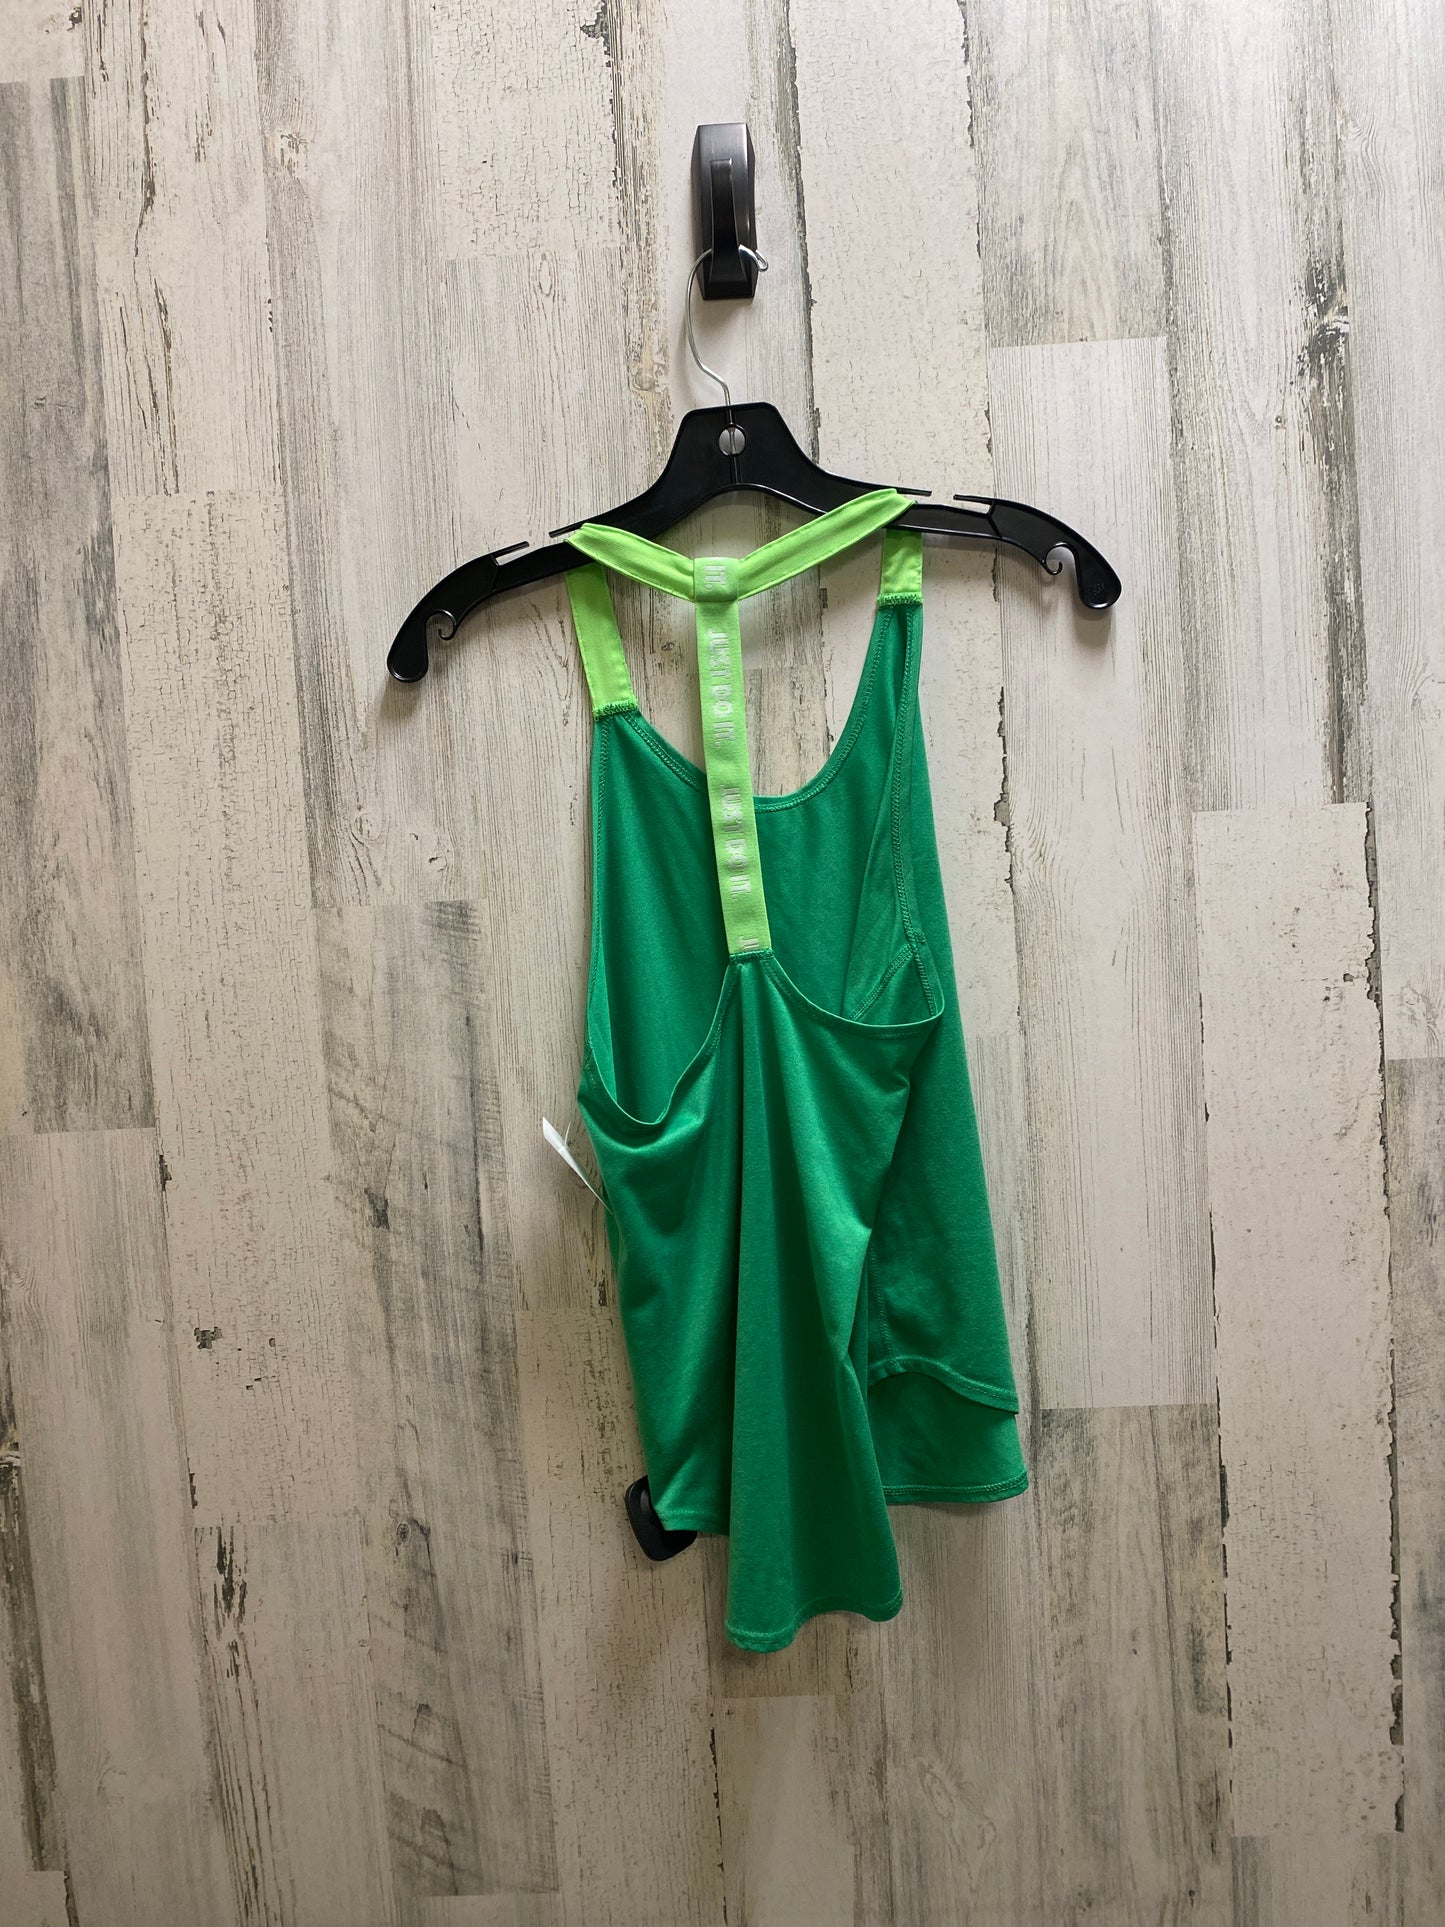 Athletic Tank Top By Nike  Size: Xs